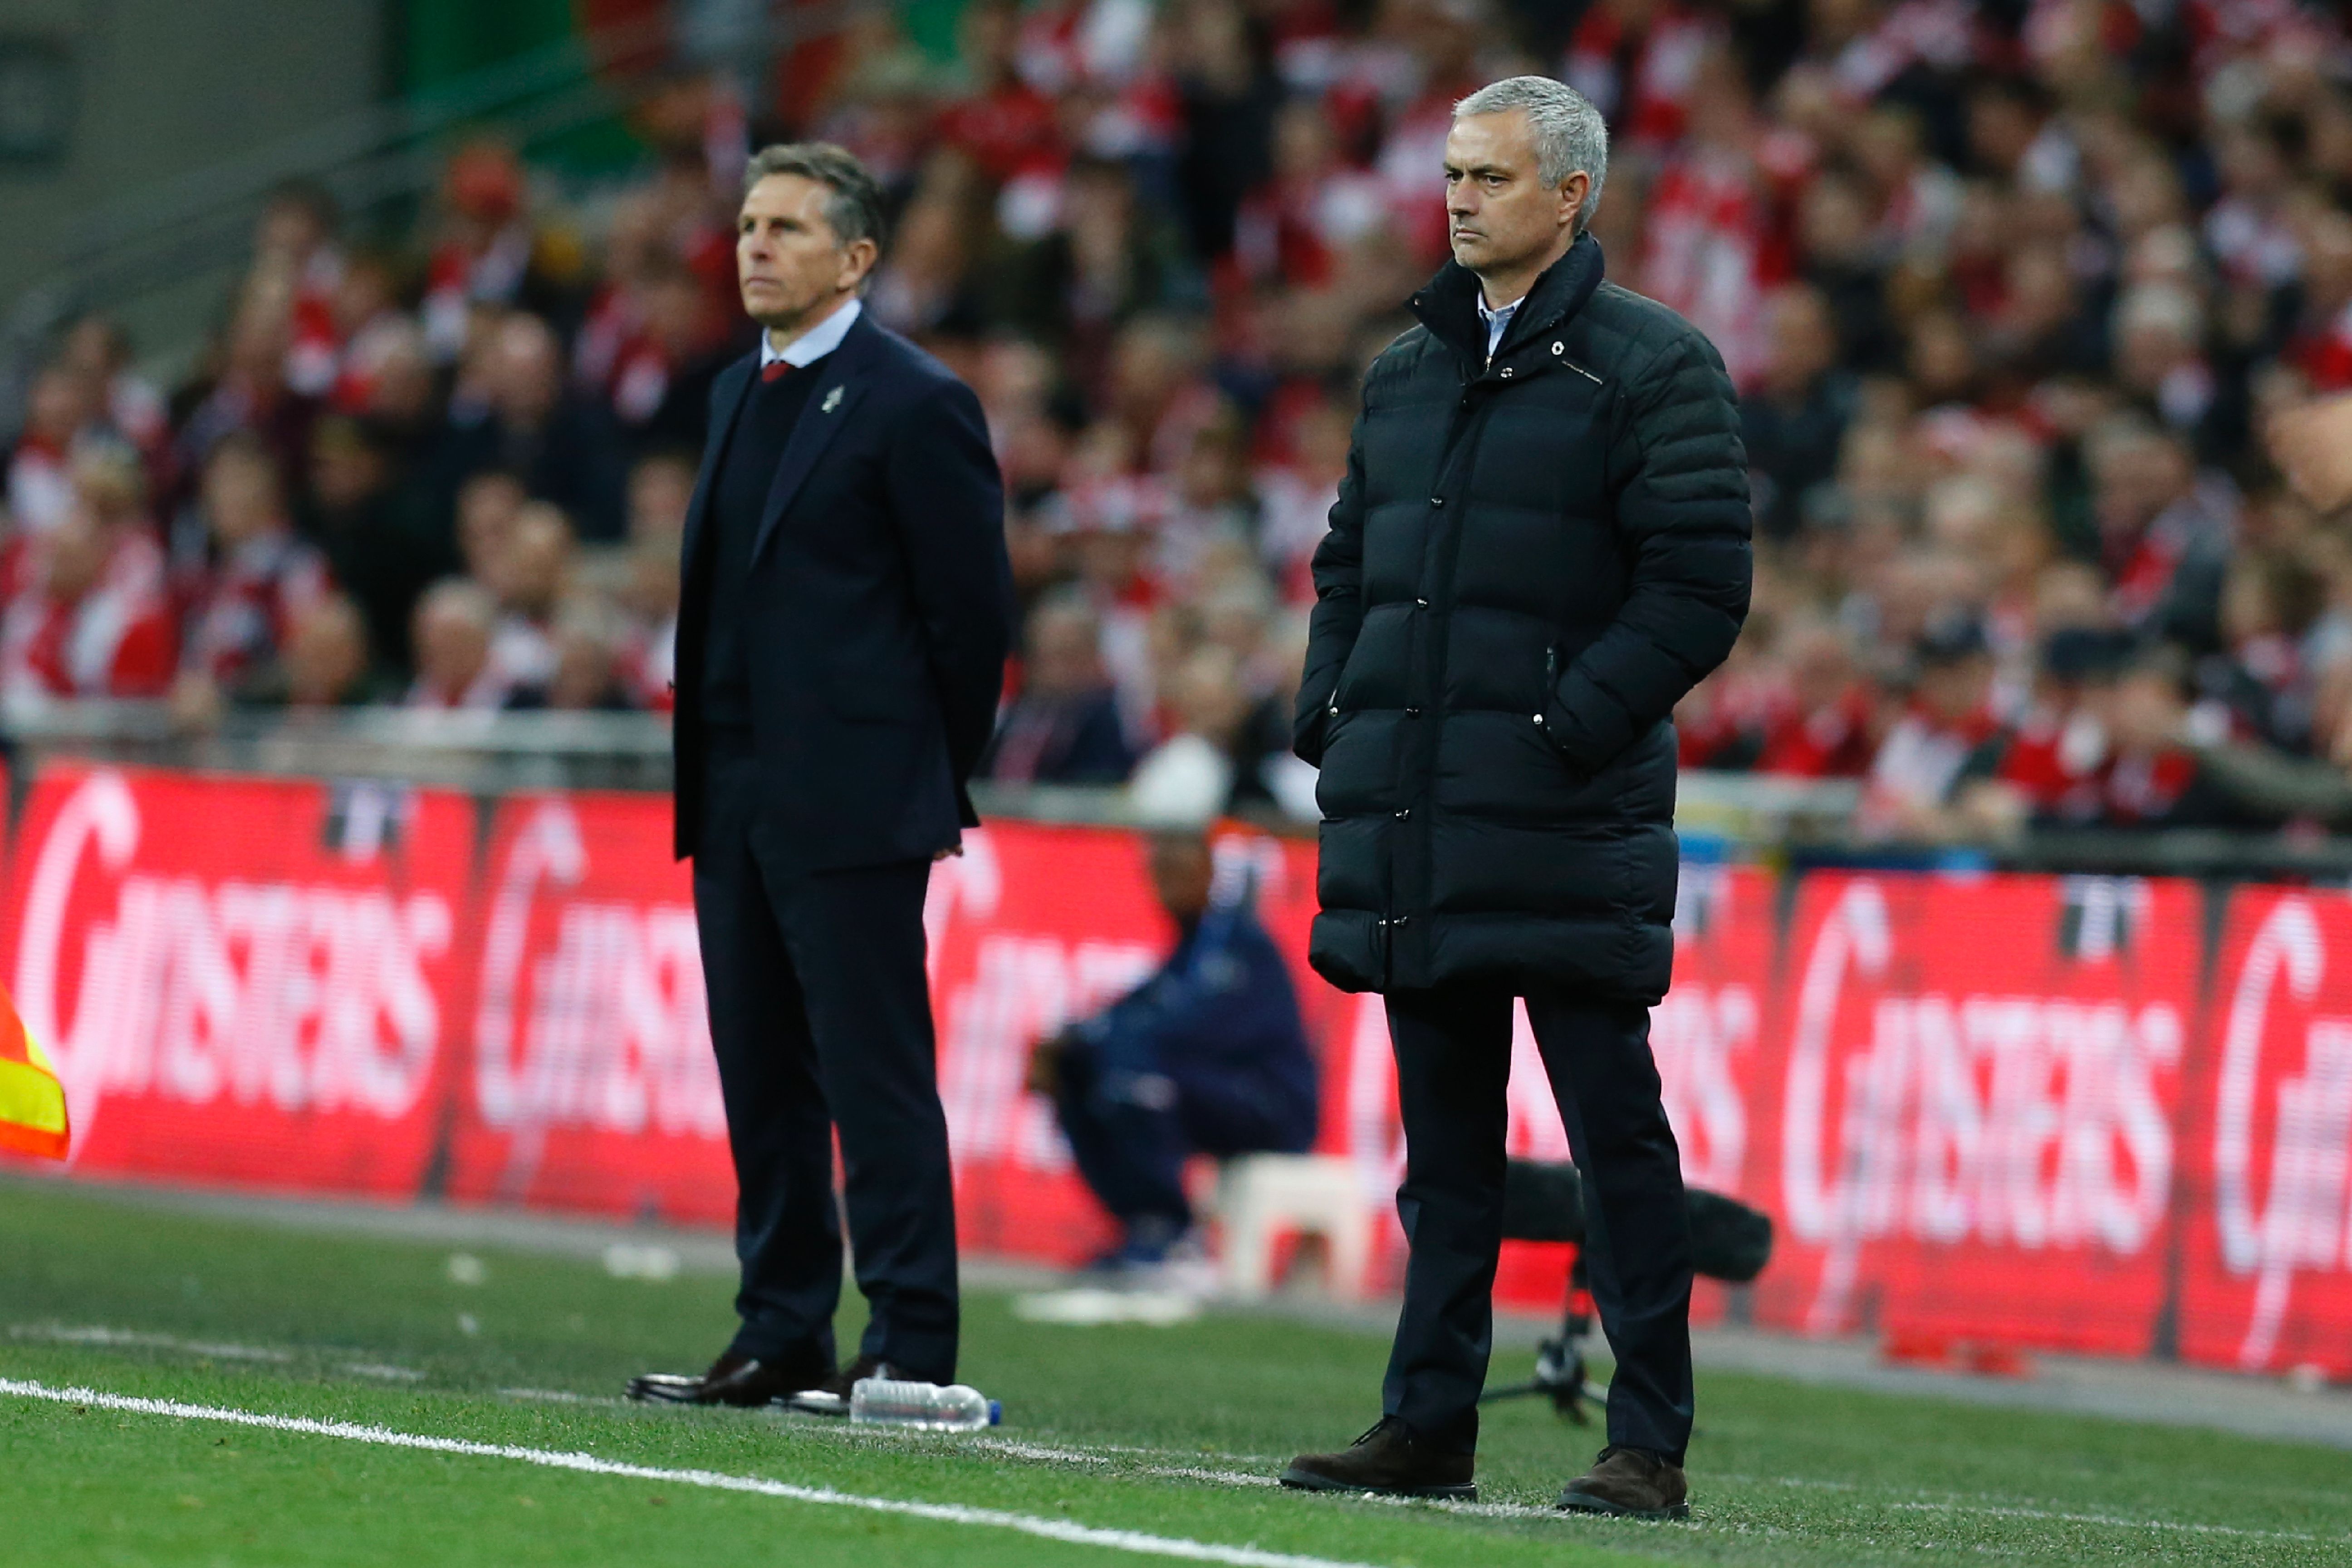 Manchester United's Portuguese manager Jose Mourinho (R) and Southampton's French manager Claude Puel watch from the touchline during the English League Cup final football match between Manchester United and Southampton at Wembley stadium in north London on February 26, 2017.
Manchester United won the game 3-2. / AFP / Ian KINGTON / RESTRICTED TO EDITORIAL USE. No use with unauthorized audio, video, data, fixture lists, club/league logos or 'live' services. Online in-match use limited to 75 images, no video emulation. No use in betting, games or single club/league/player publications.  /         (Photo credit should read IAN KINGTON/AFP/Getty Images)